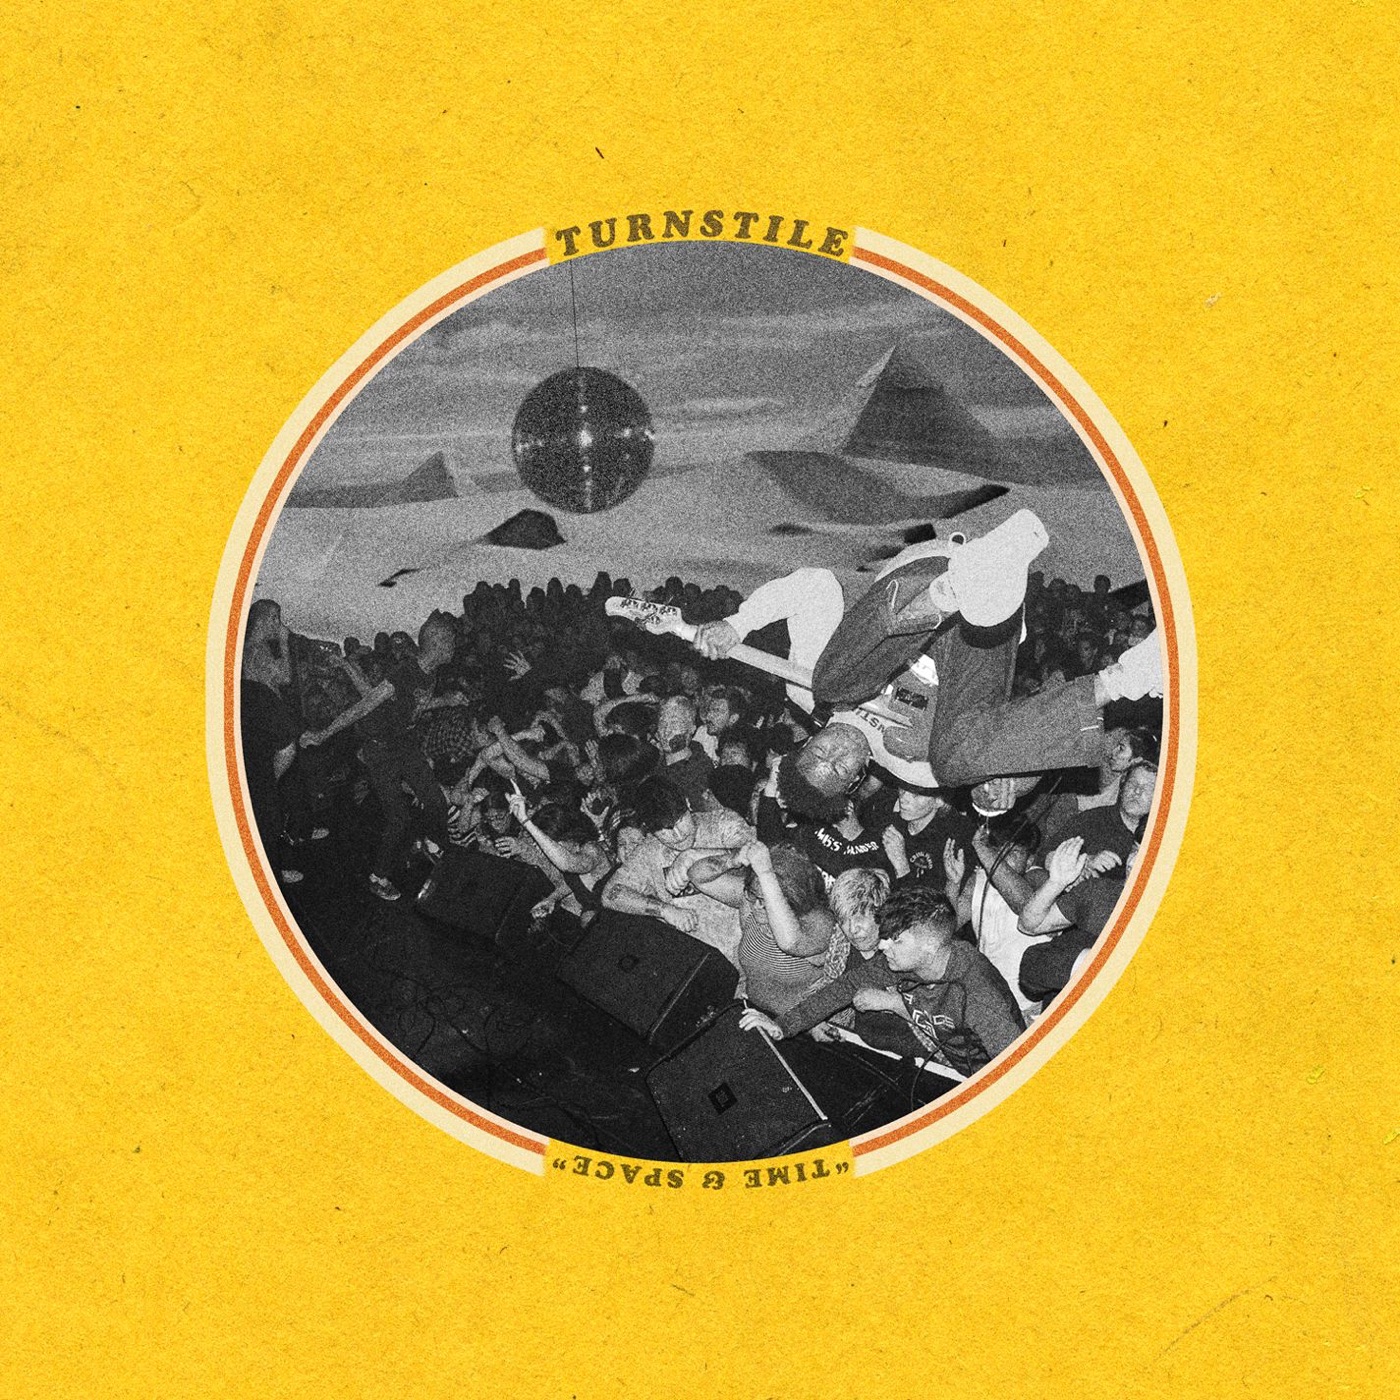 Time & Space by Turnstile